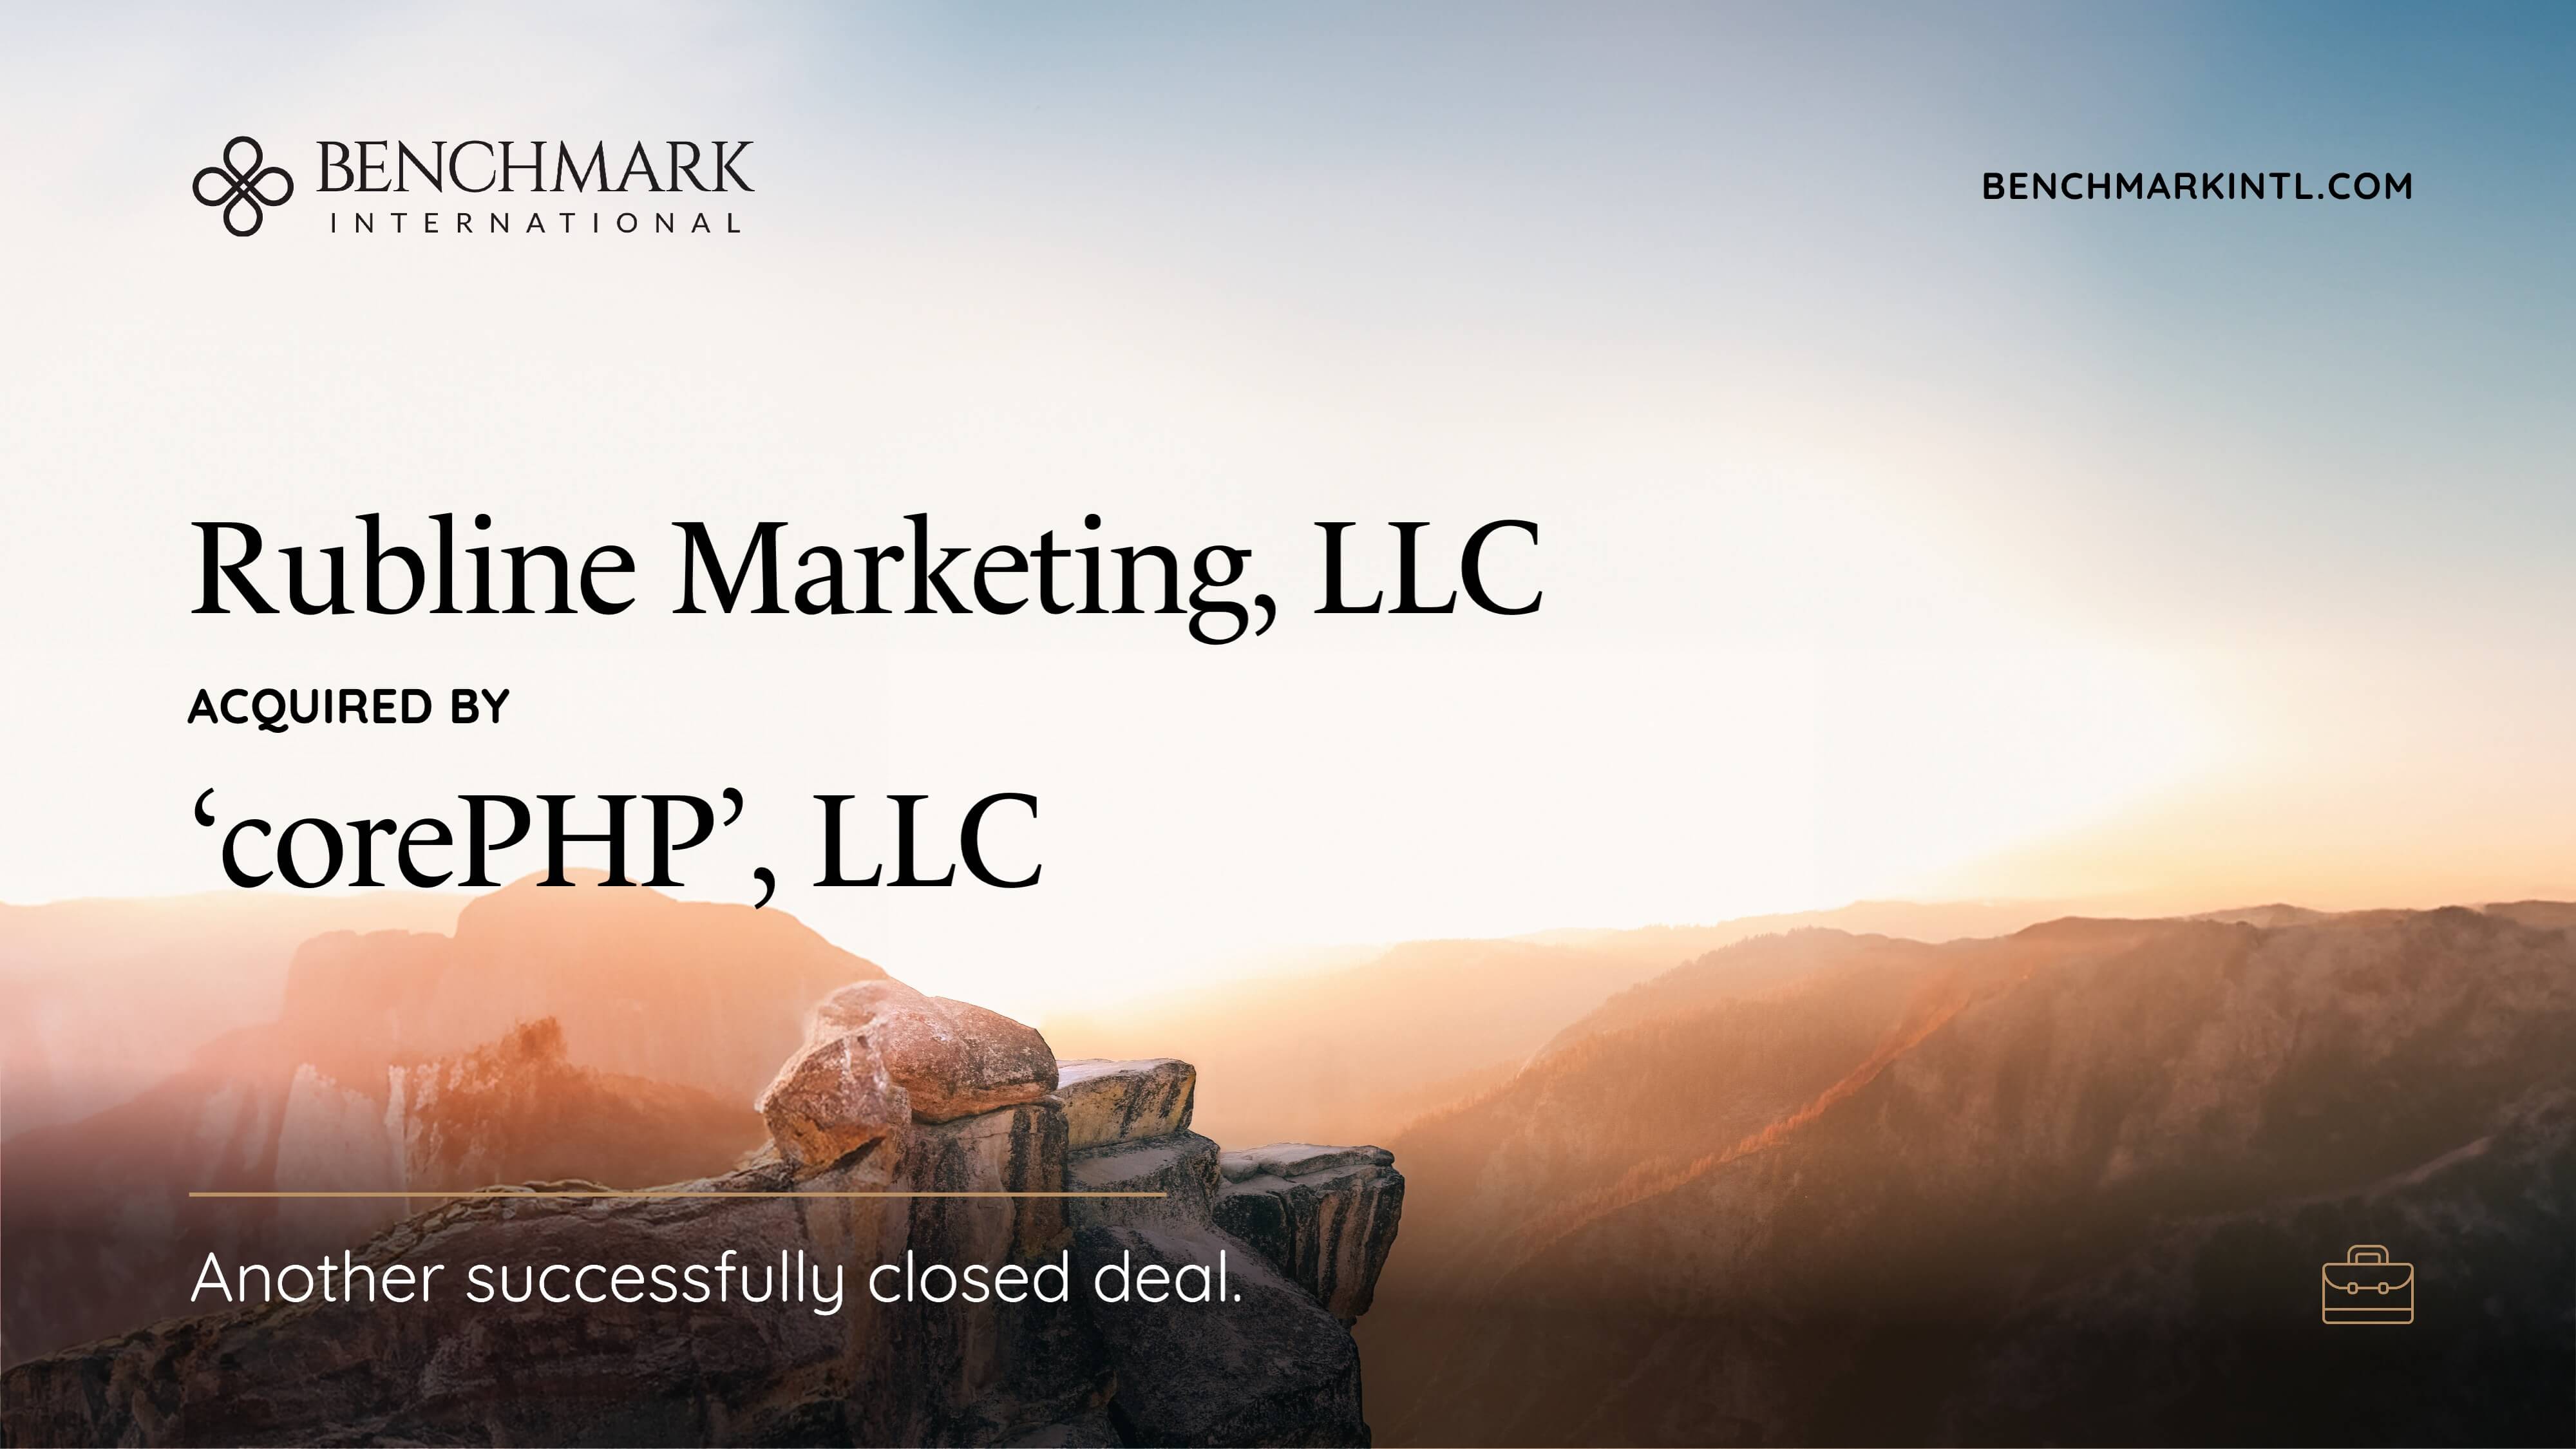 Benchmark International Successfully Facilitated The Transaction Between RubLine Marketing, LLC and ‘corePHP’, LLC